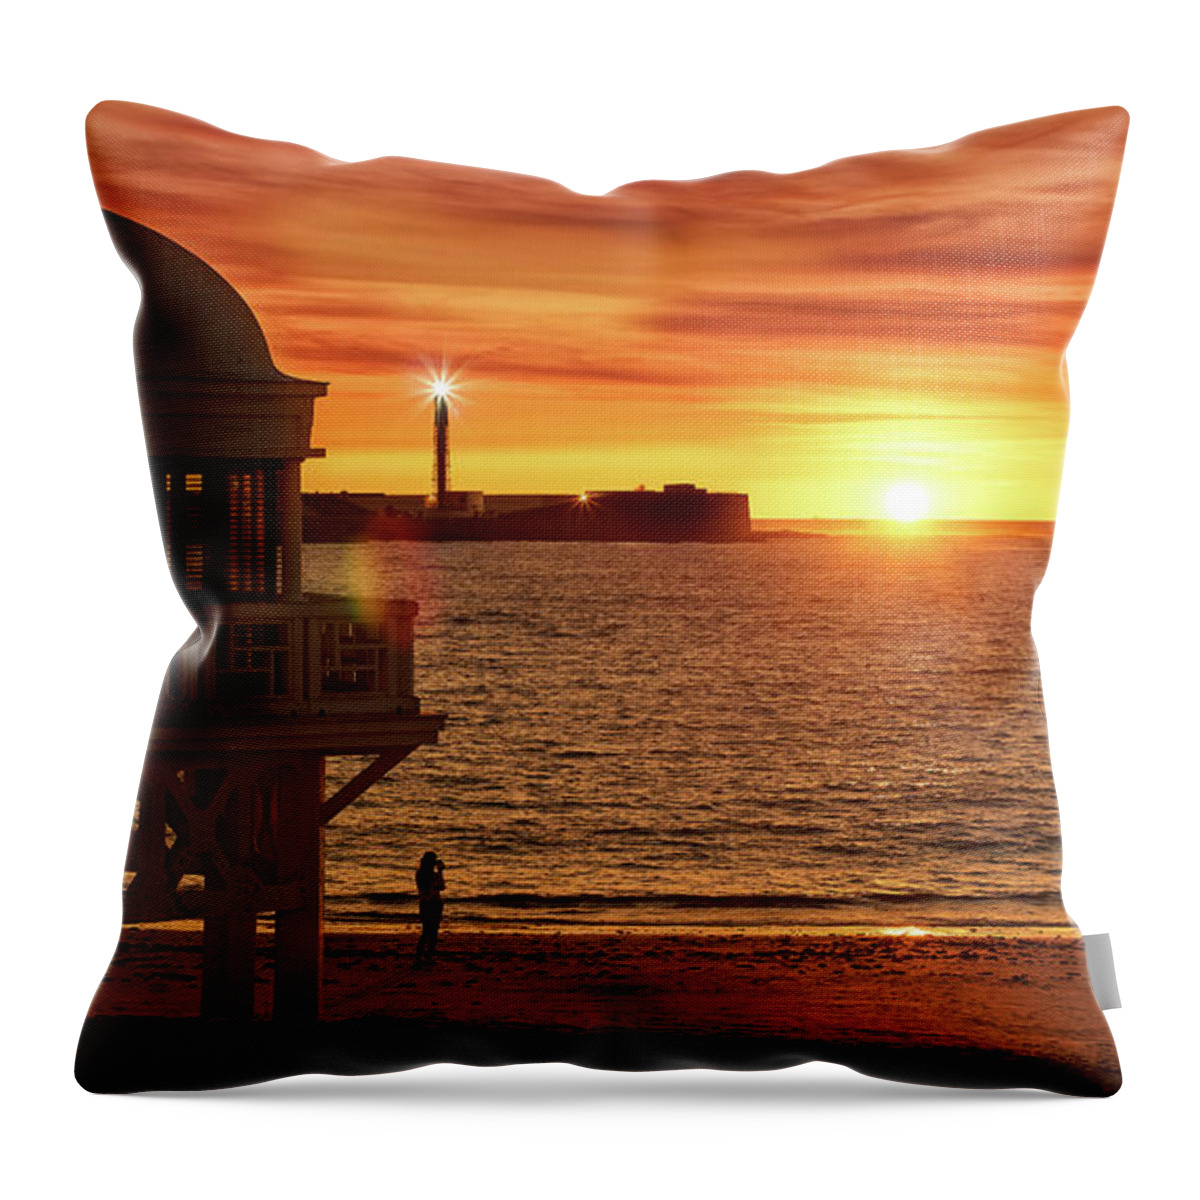 Outdoors Throw Pillow featuring the photograph Girl Photographing Sunset at La Caleta Spa by Pablo Avanzini